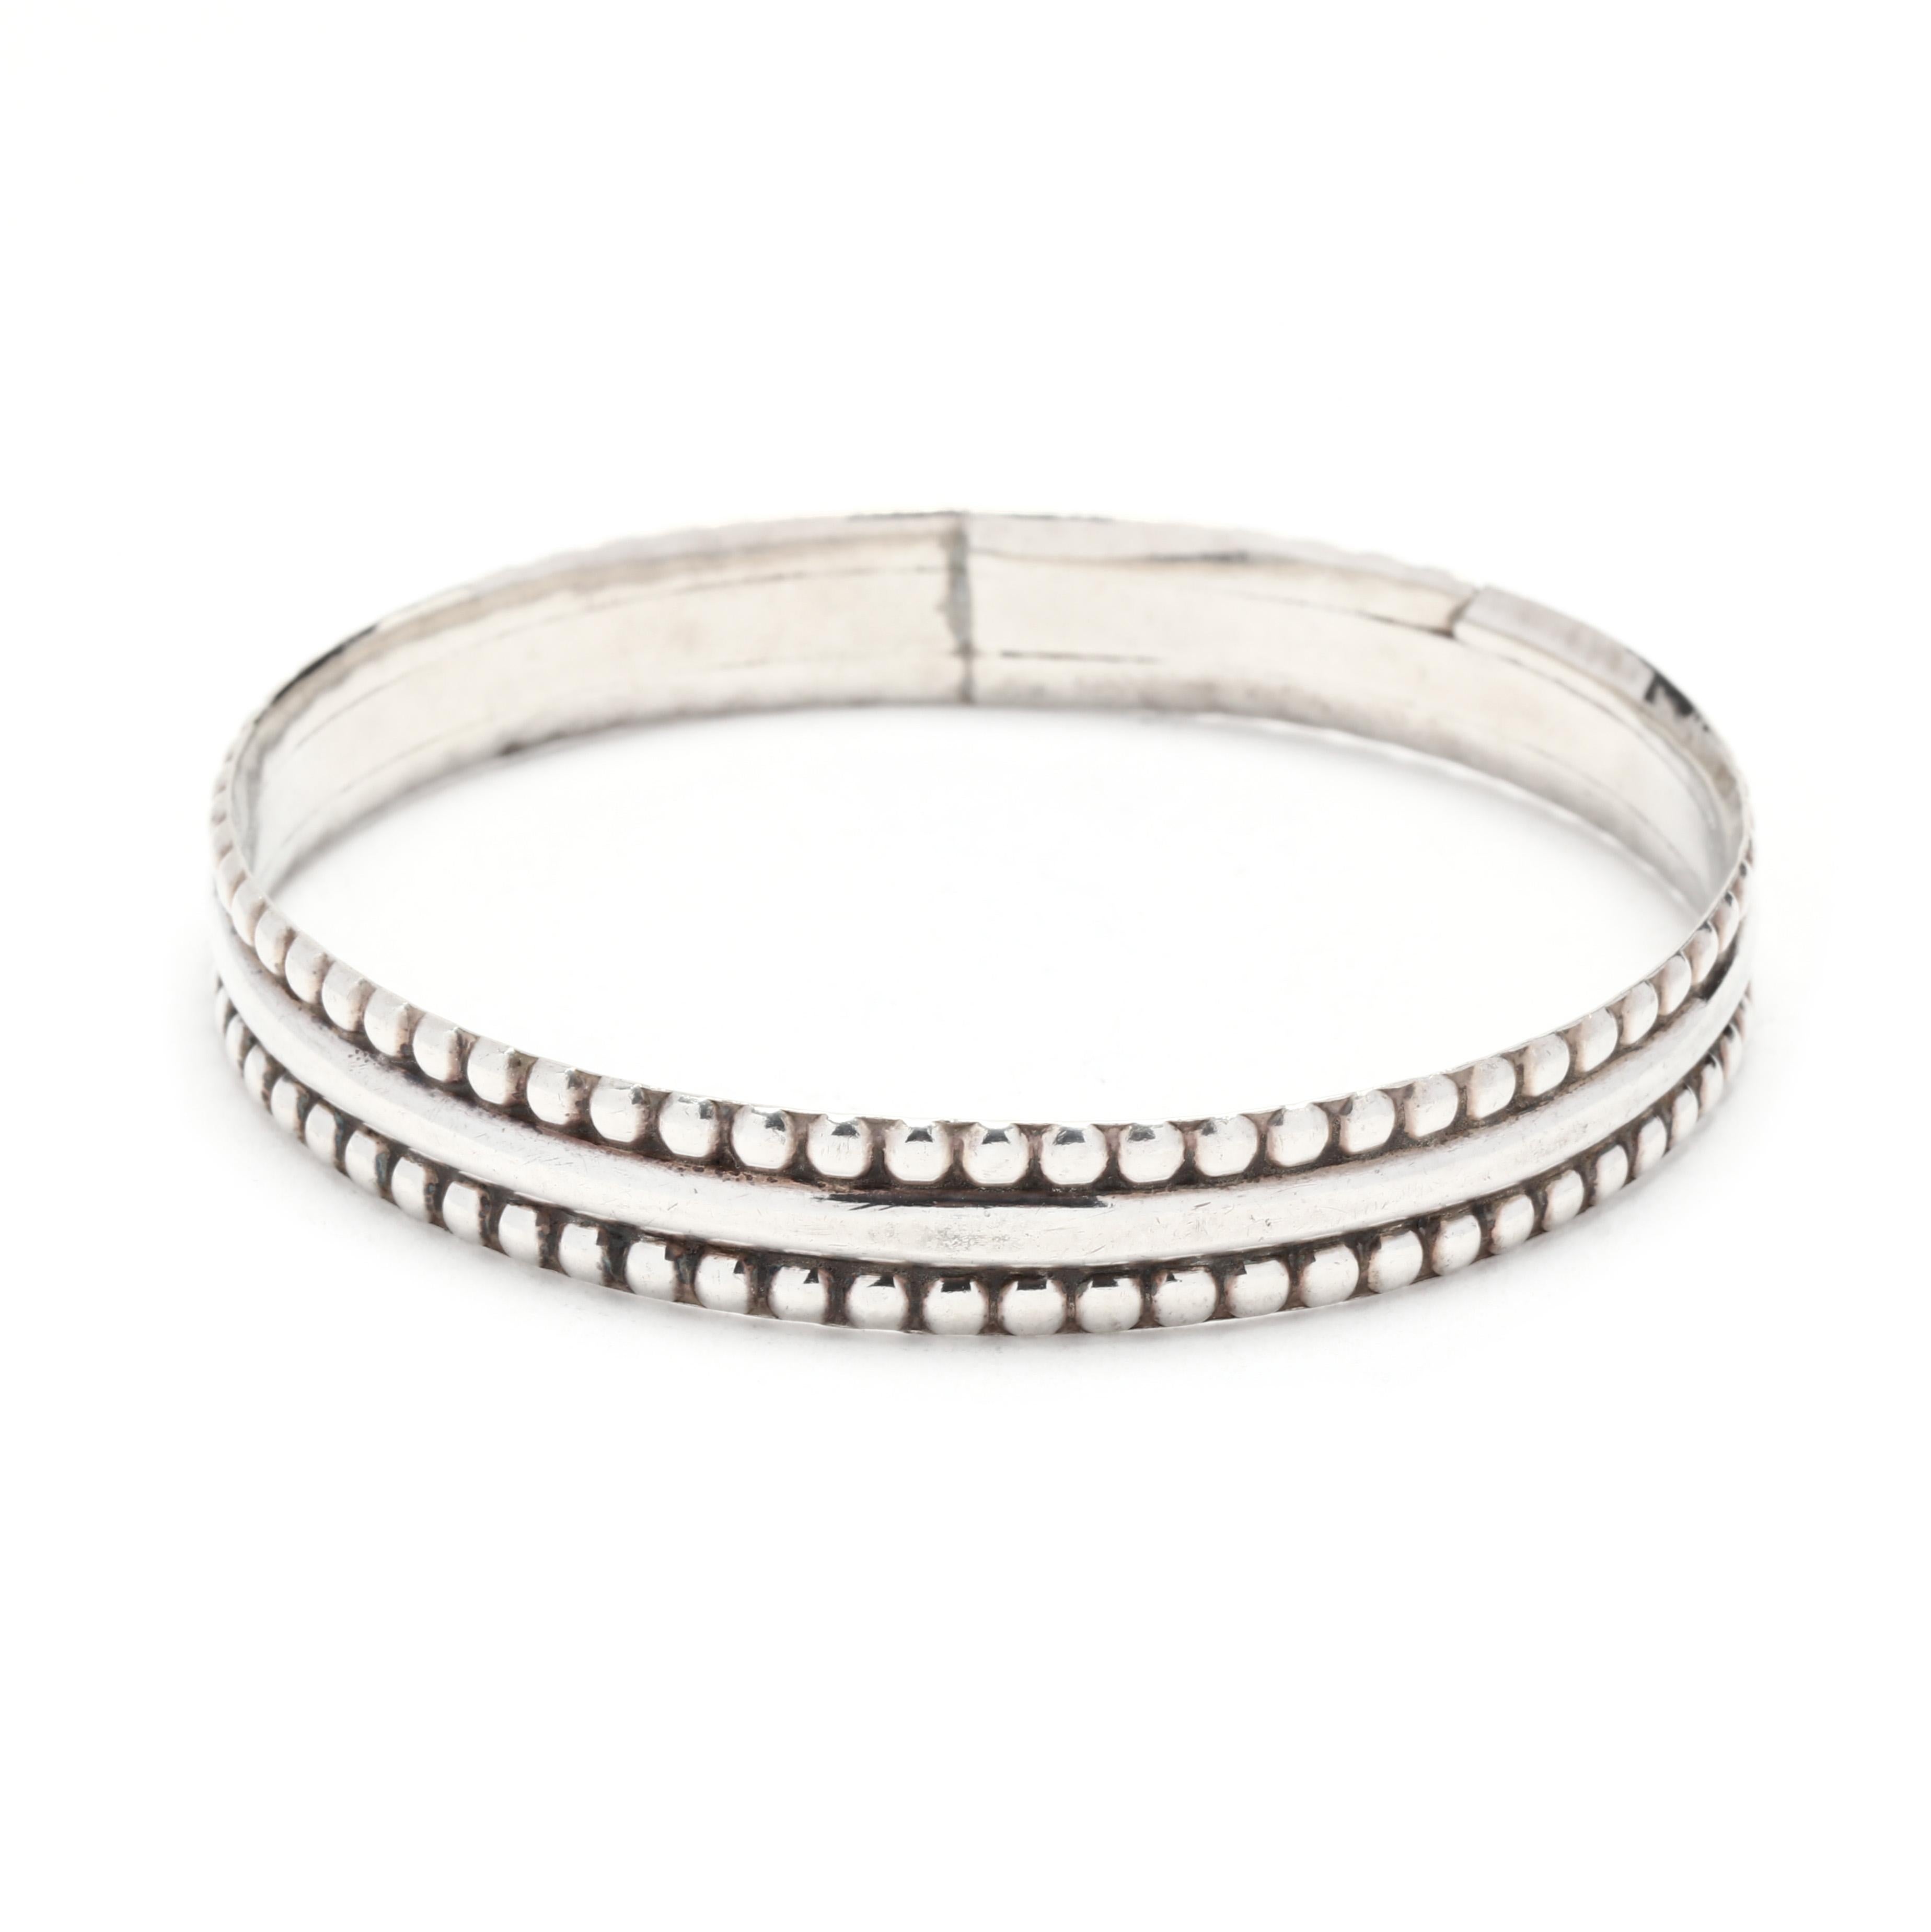 A sterling silver beaded eternity bangle bracelet.  This bangle features a smooth polished center banded with low relief beaded decoration at top and bottom edge.  It is stamped Sterling Silver and with mark SU. 

Length: 8 inches

Width: 3/8